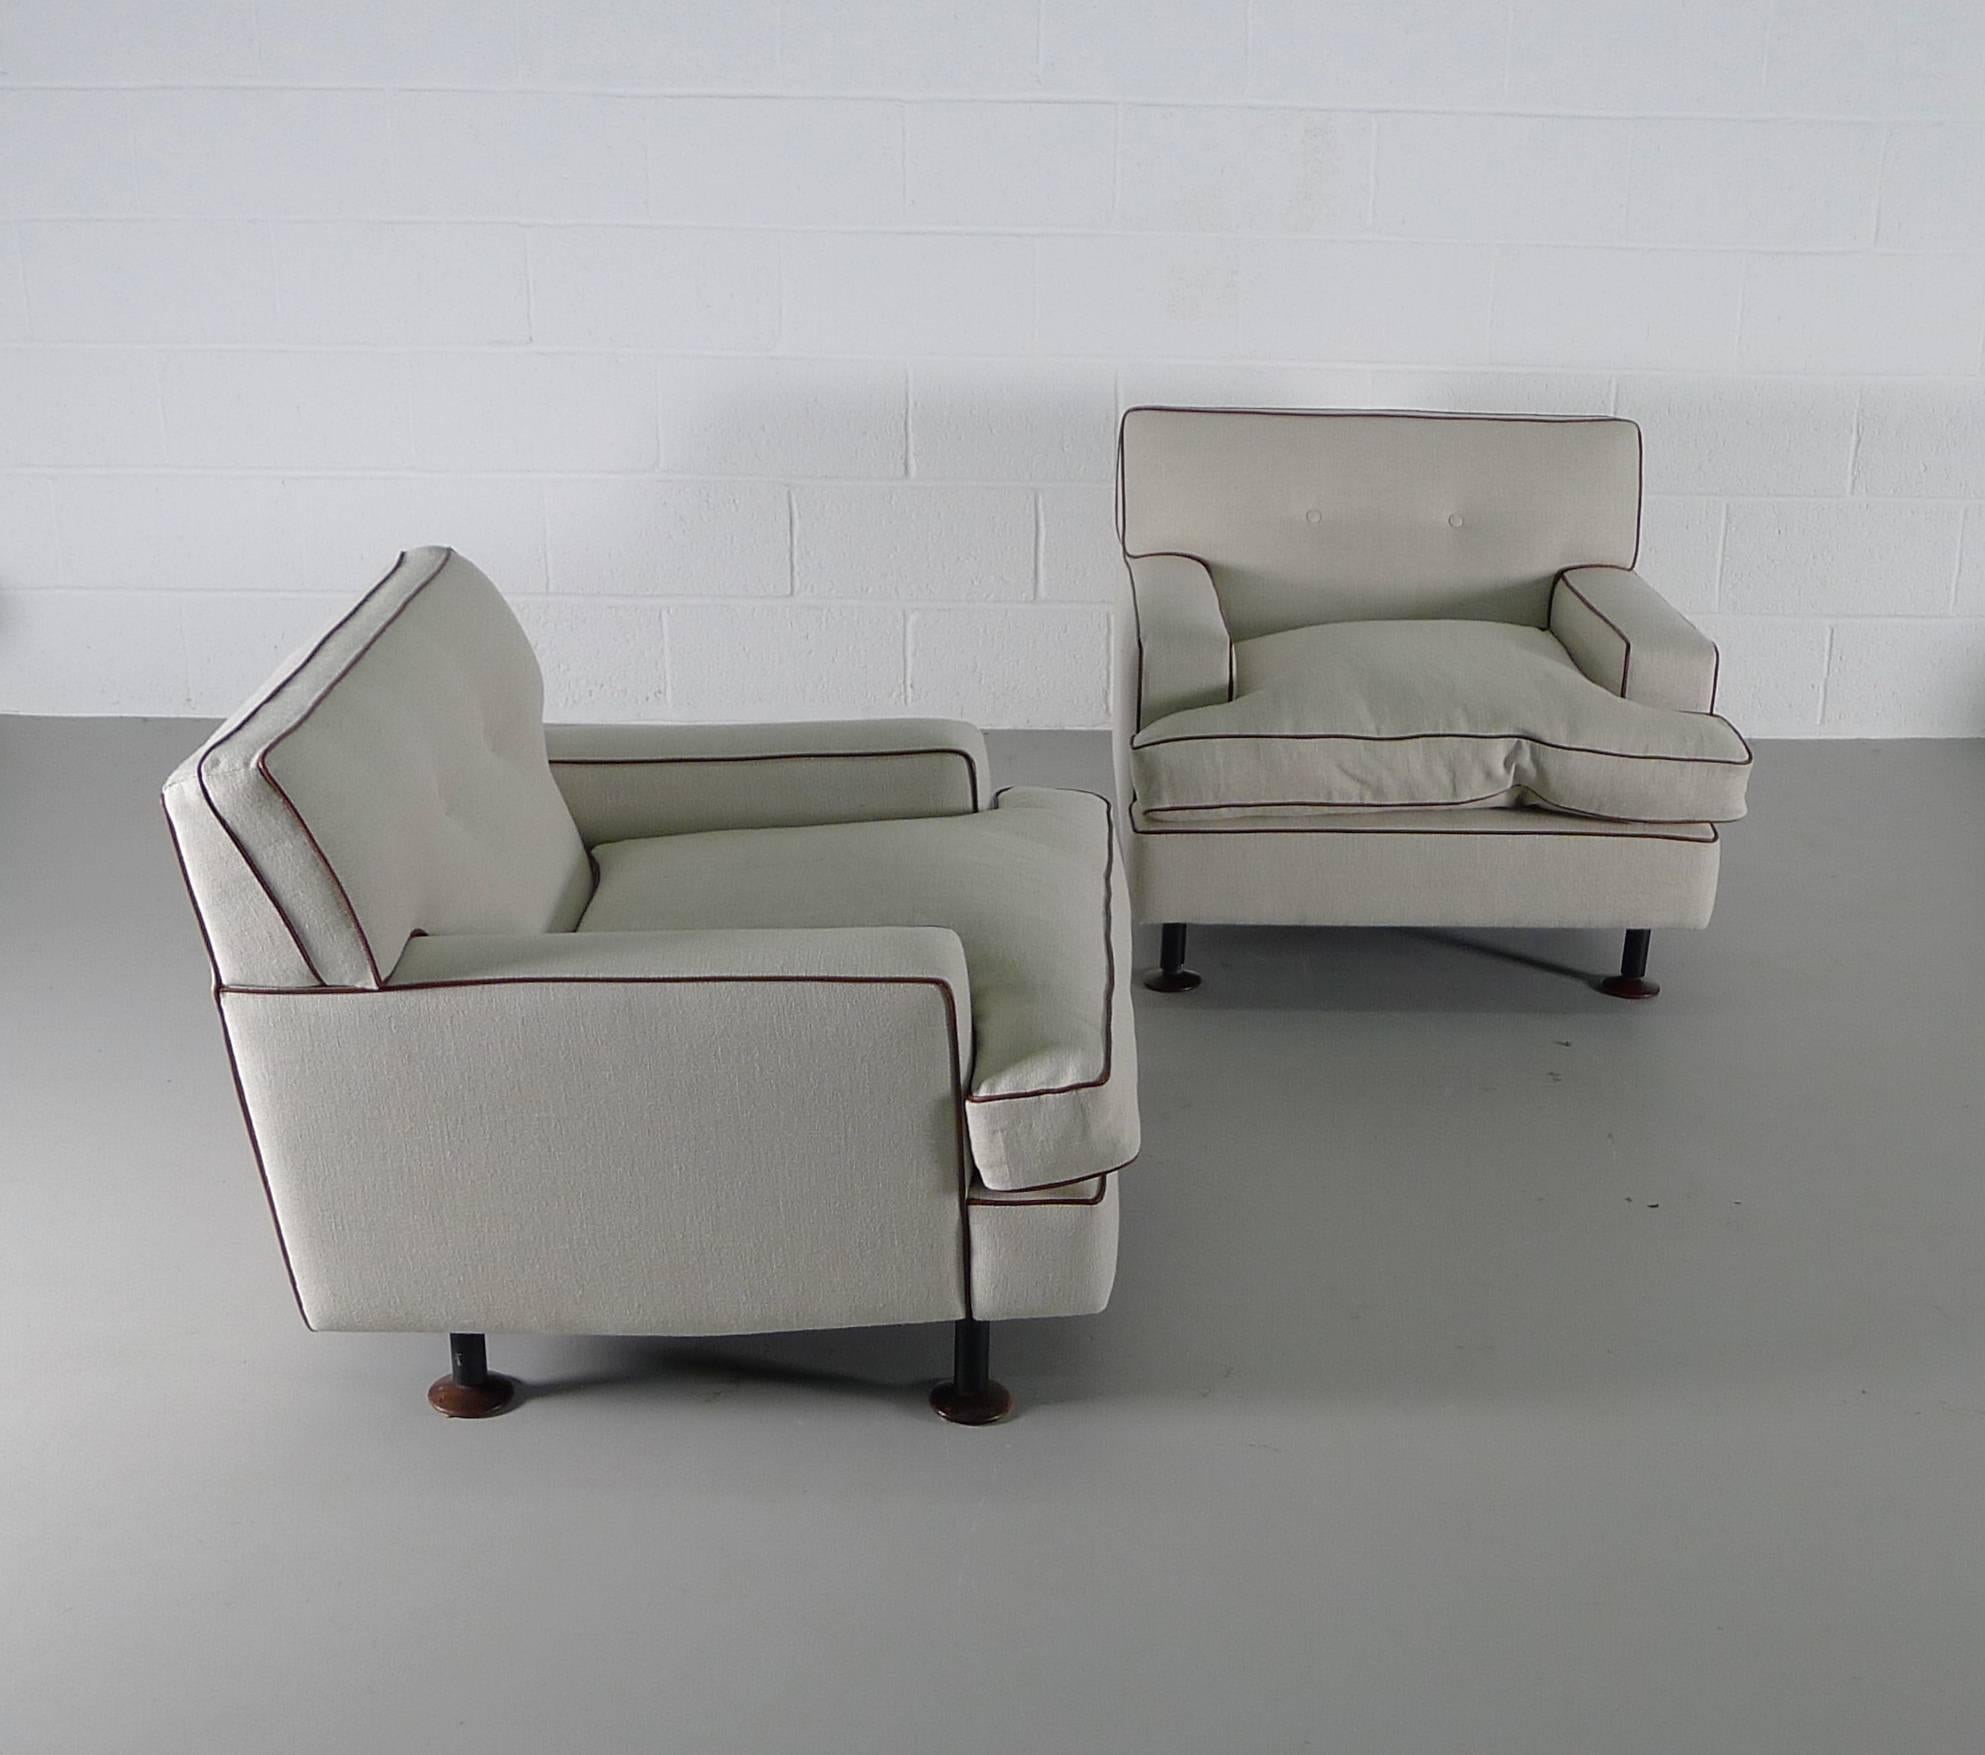 Marco Zanuso for Arflex, Italy, 1962. A pair of armchairs model 